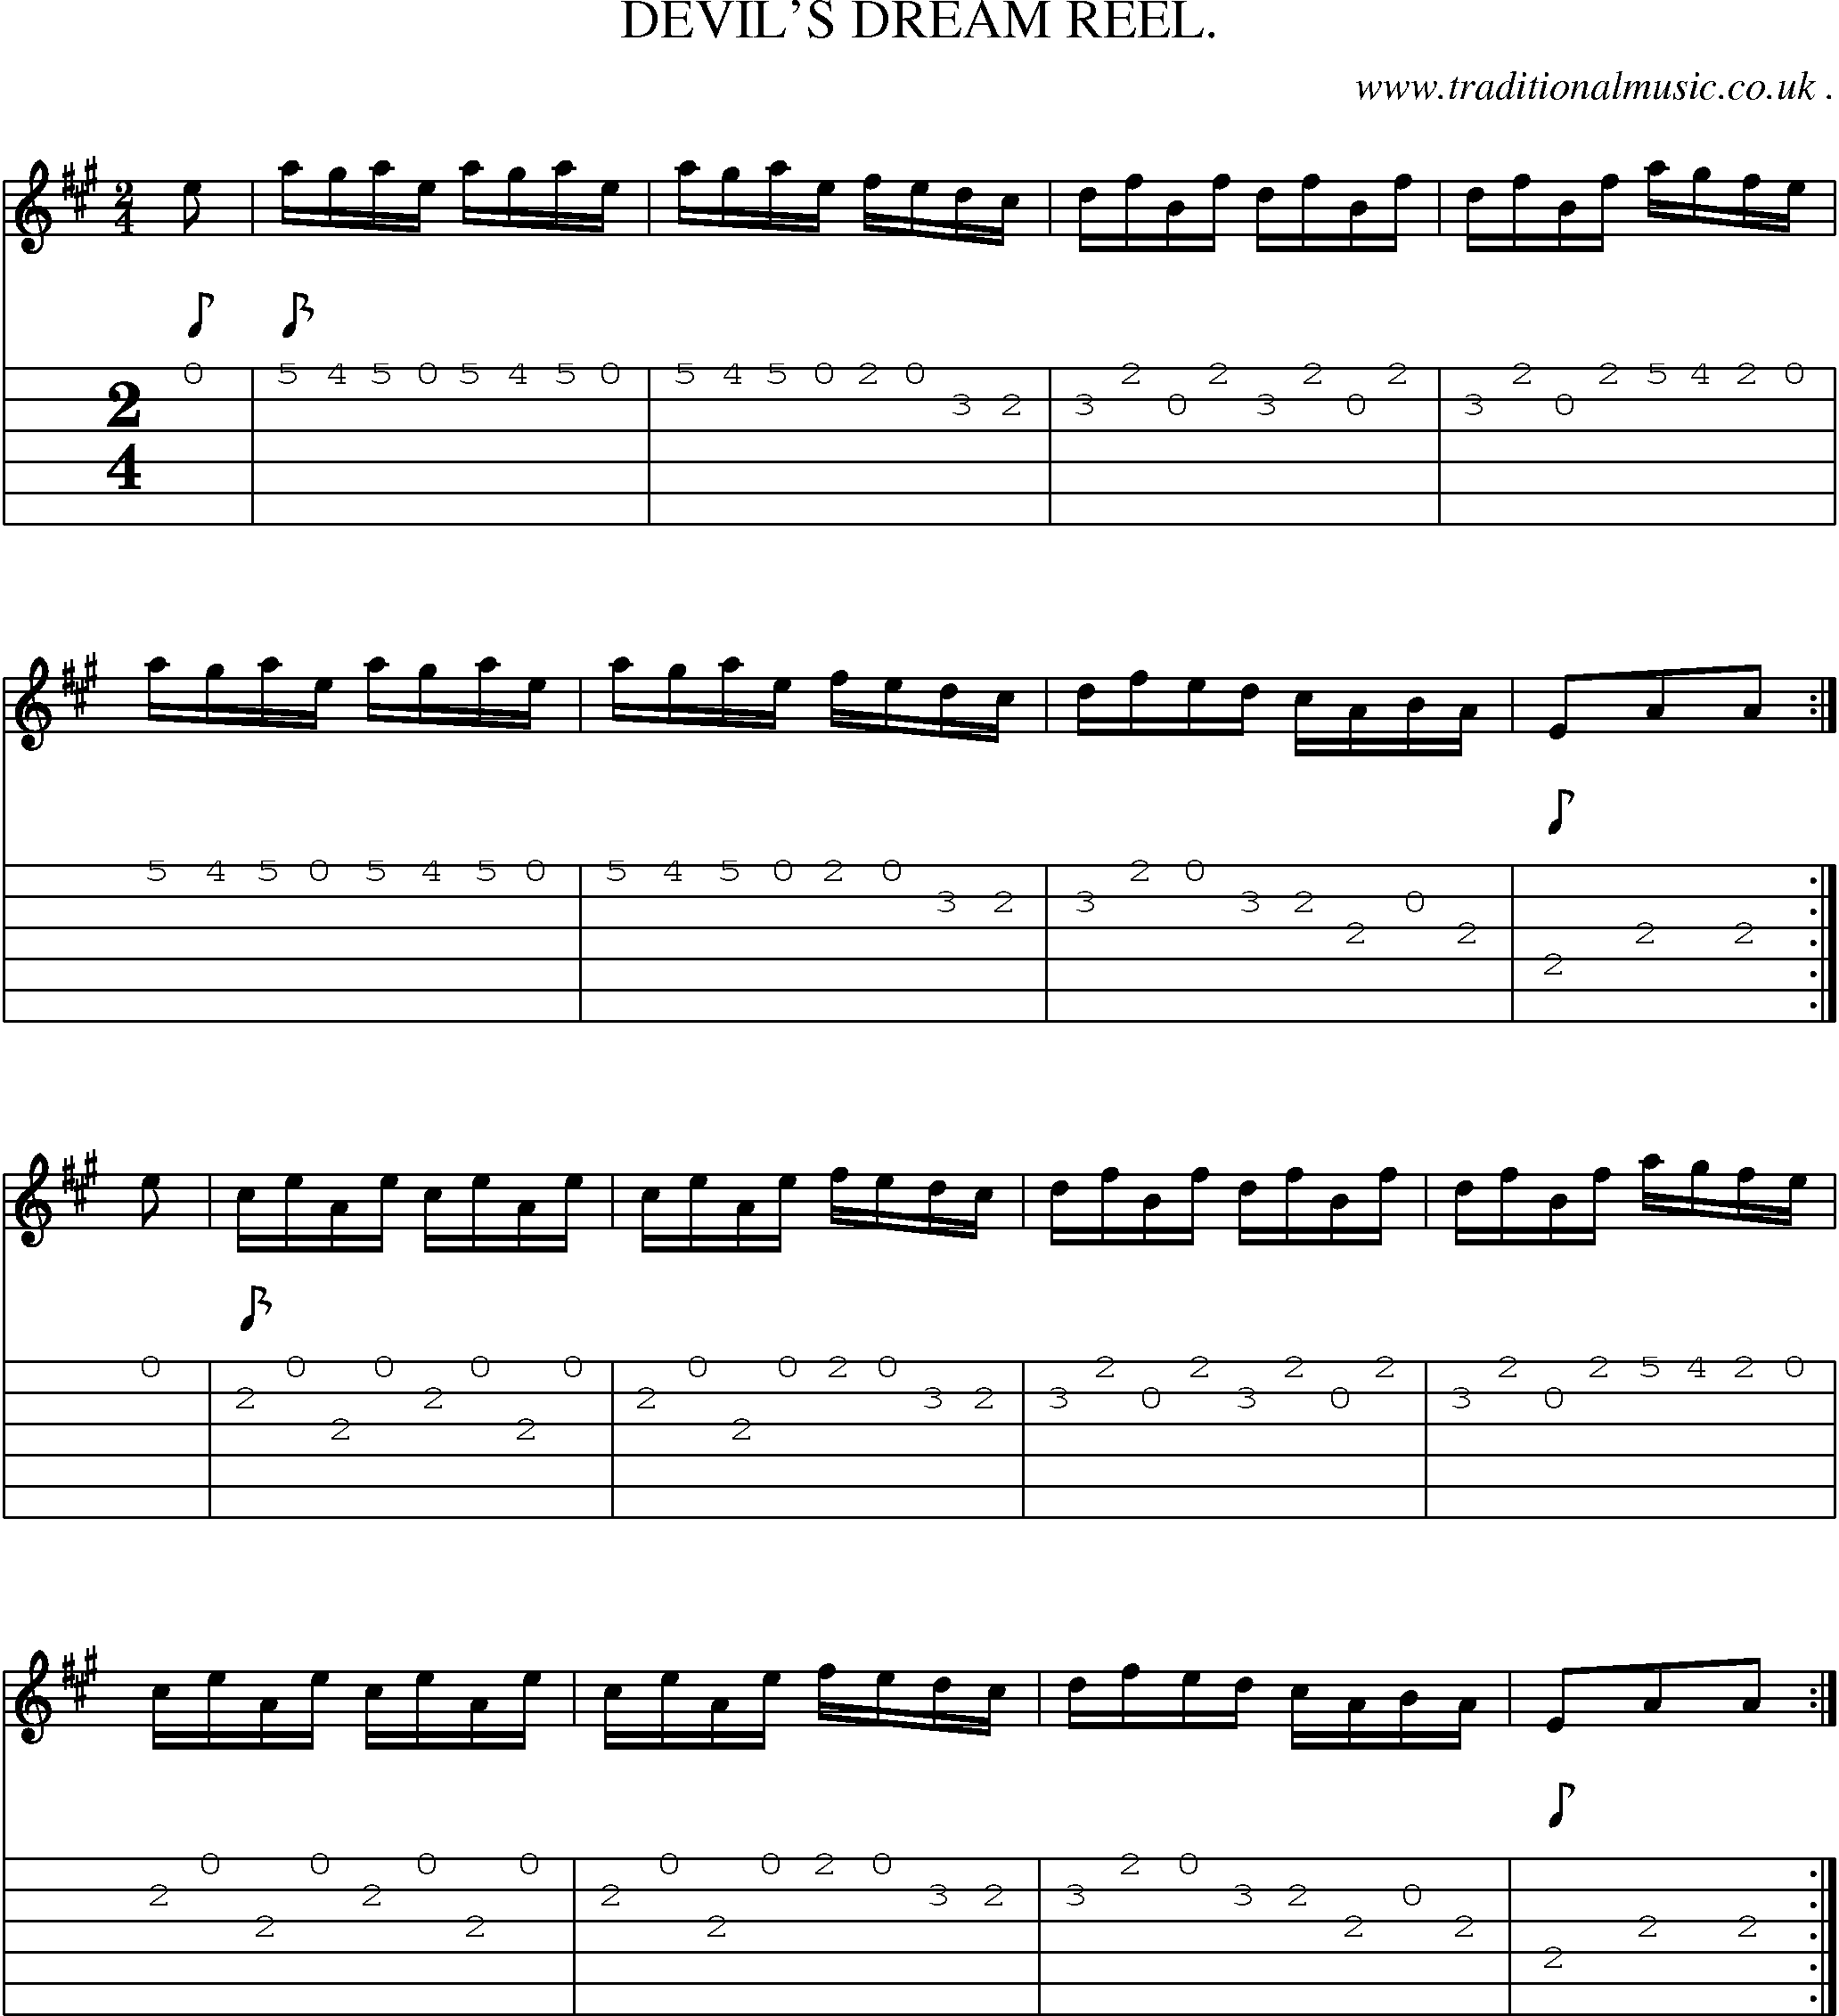 Sheet-Music and Guitar Tabs for Devils Dream Reel